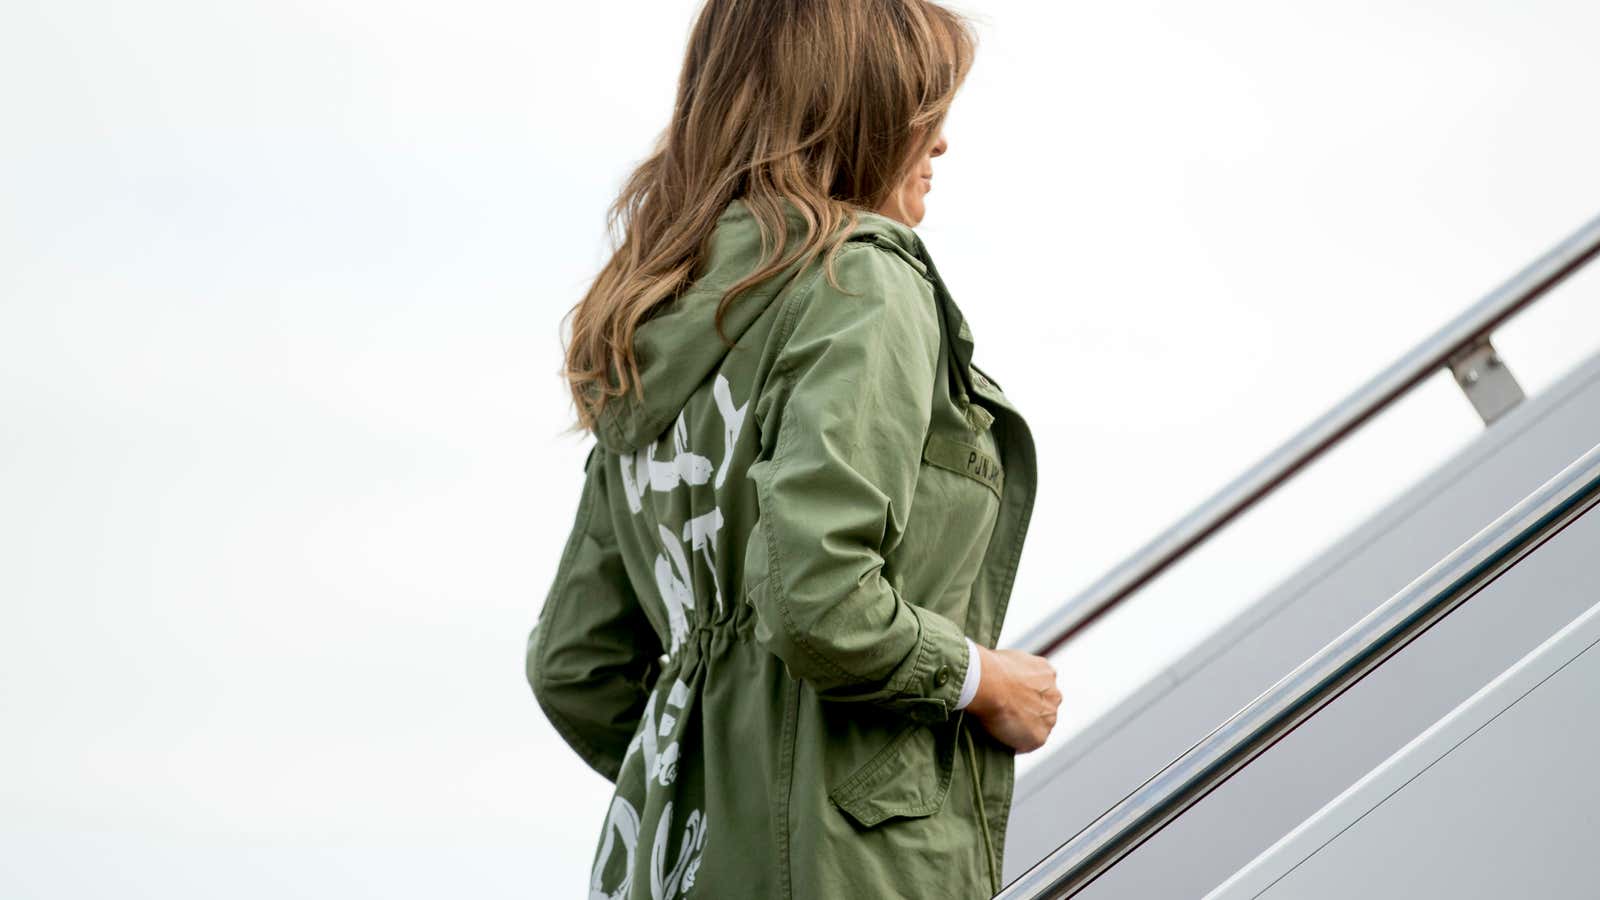 Melania Trump boards a plane to an immigrant children’s shelter in Texas wearing a jacket that reads “I really don’t care. Do U?”